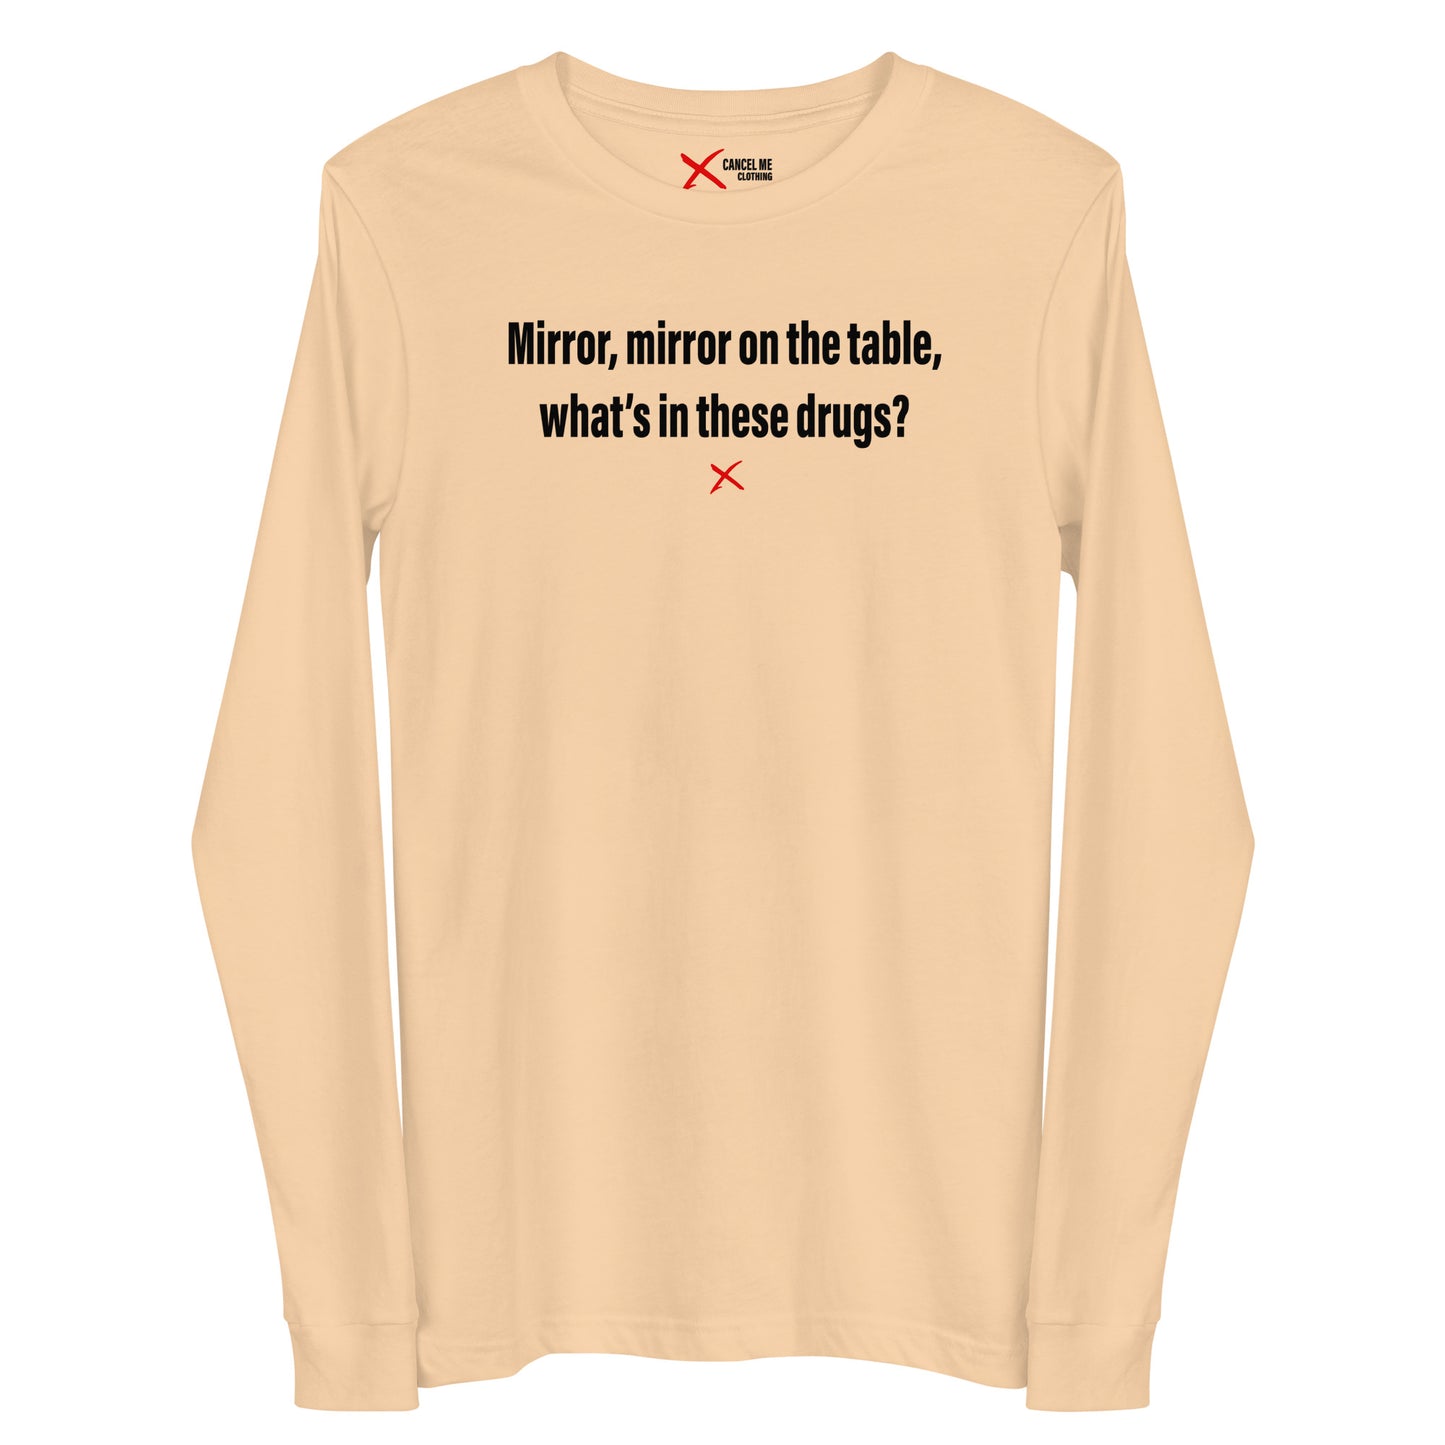 Mirror, mirror on the table, what's in these drugs? - Longsleeve